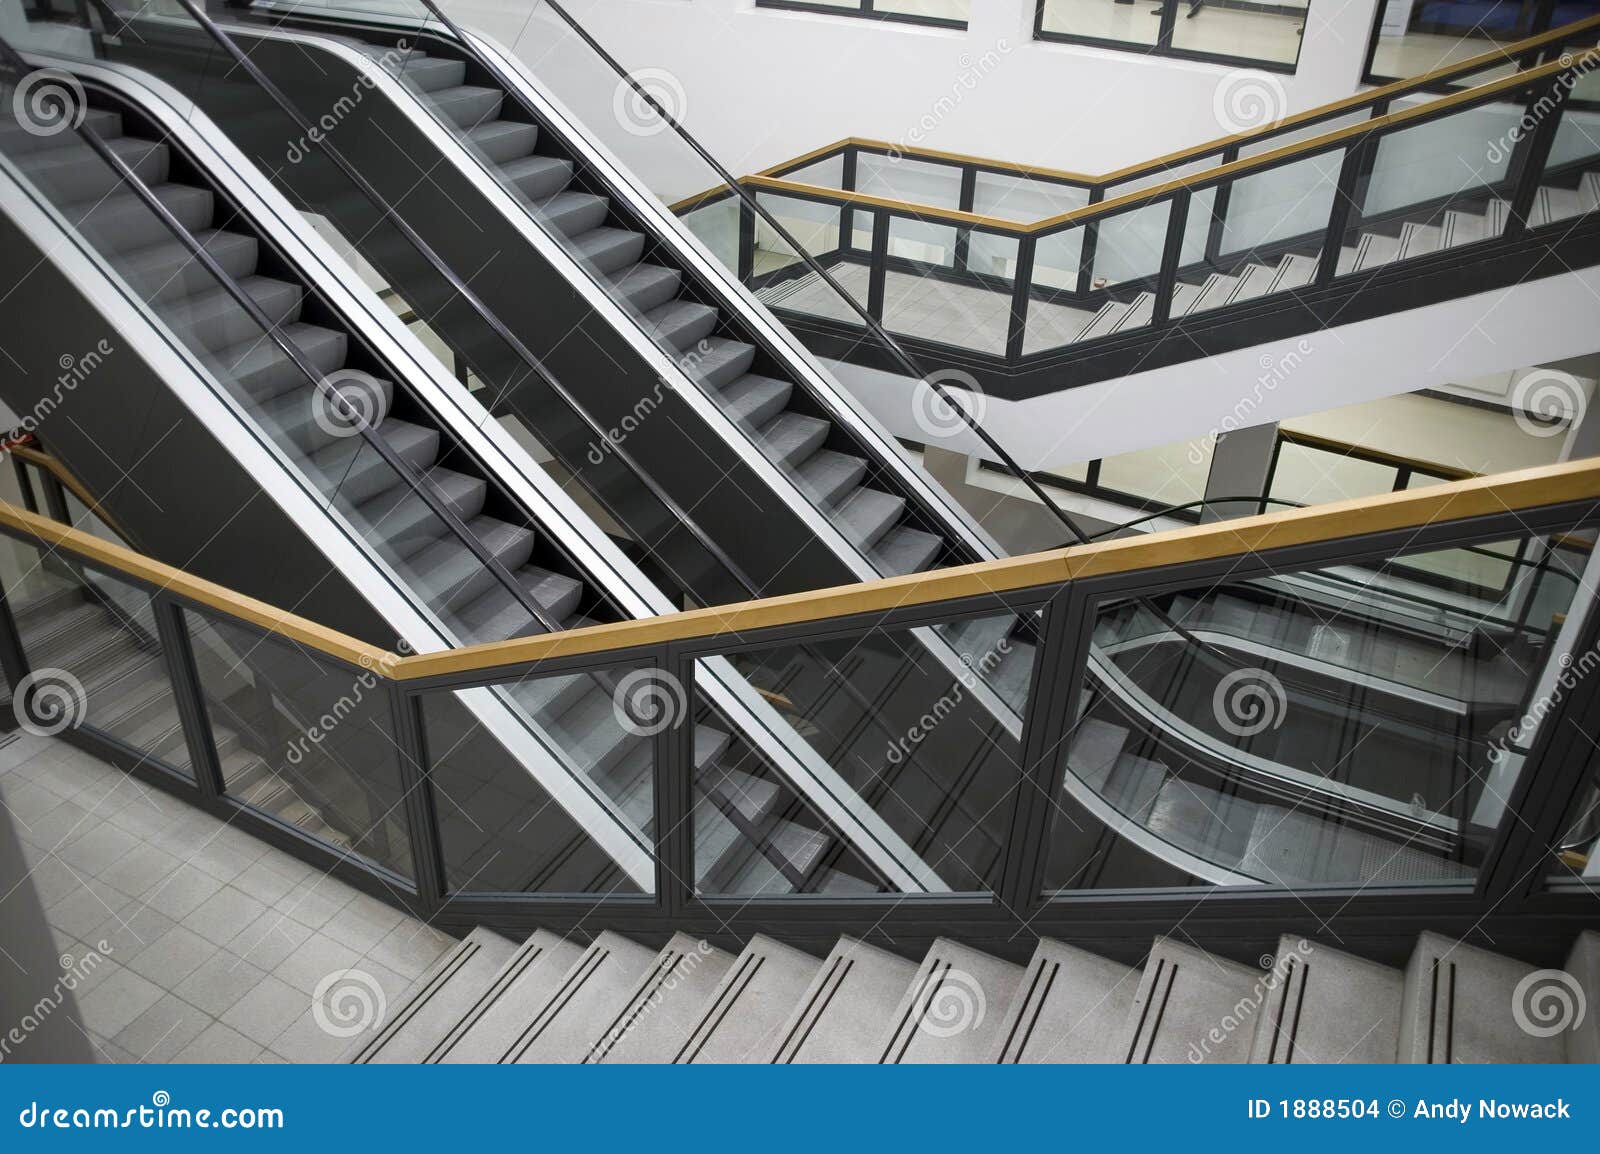 escalators and stairs